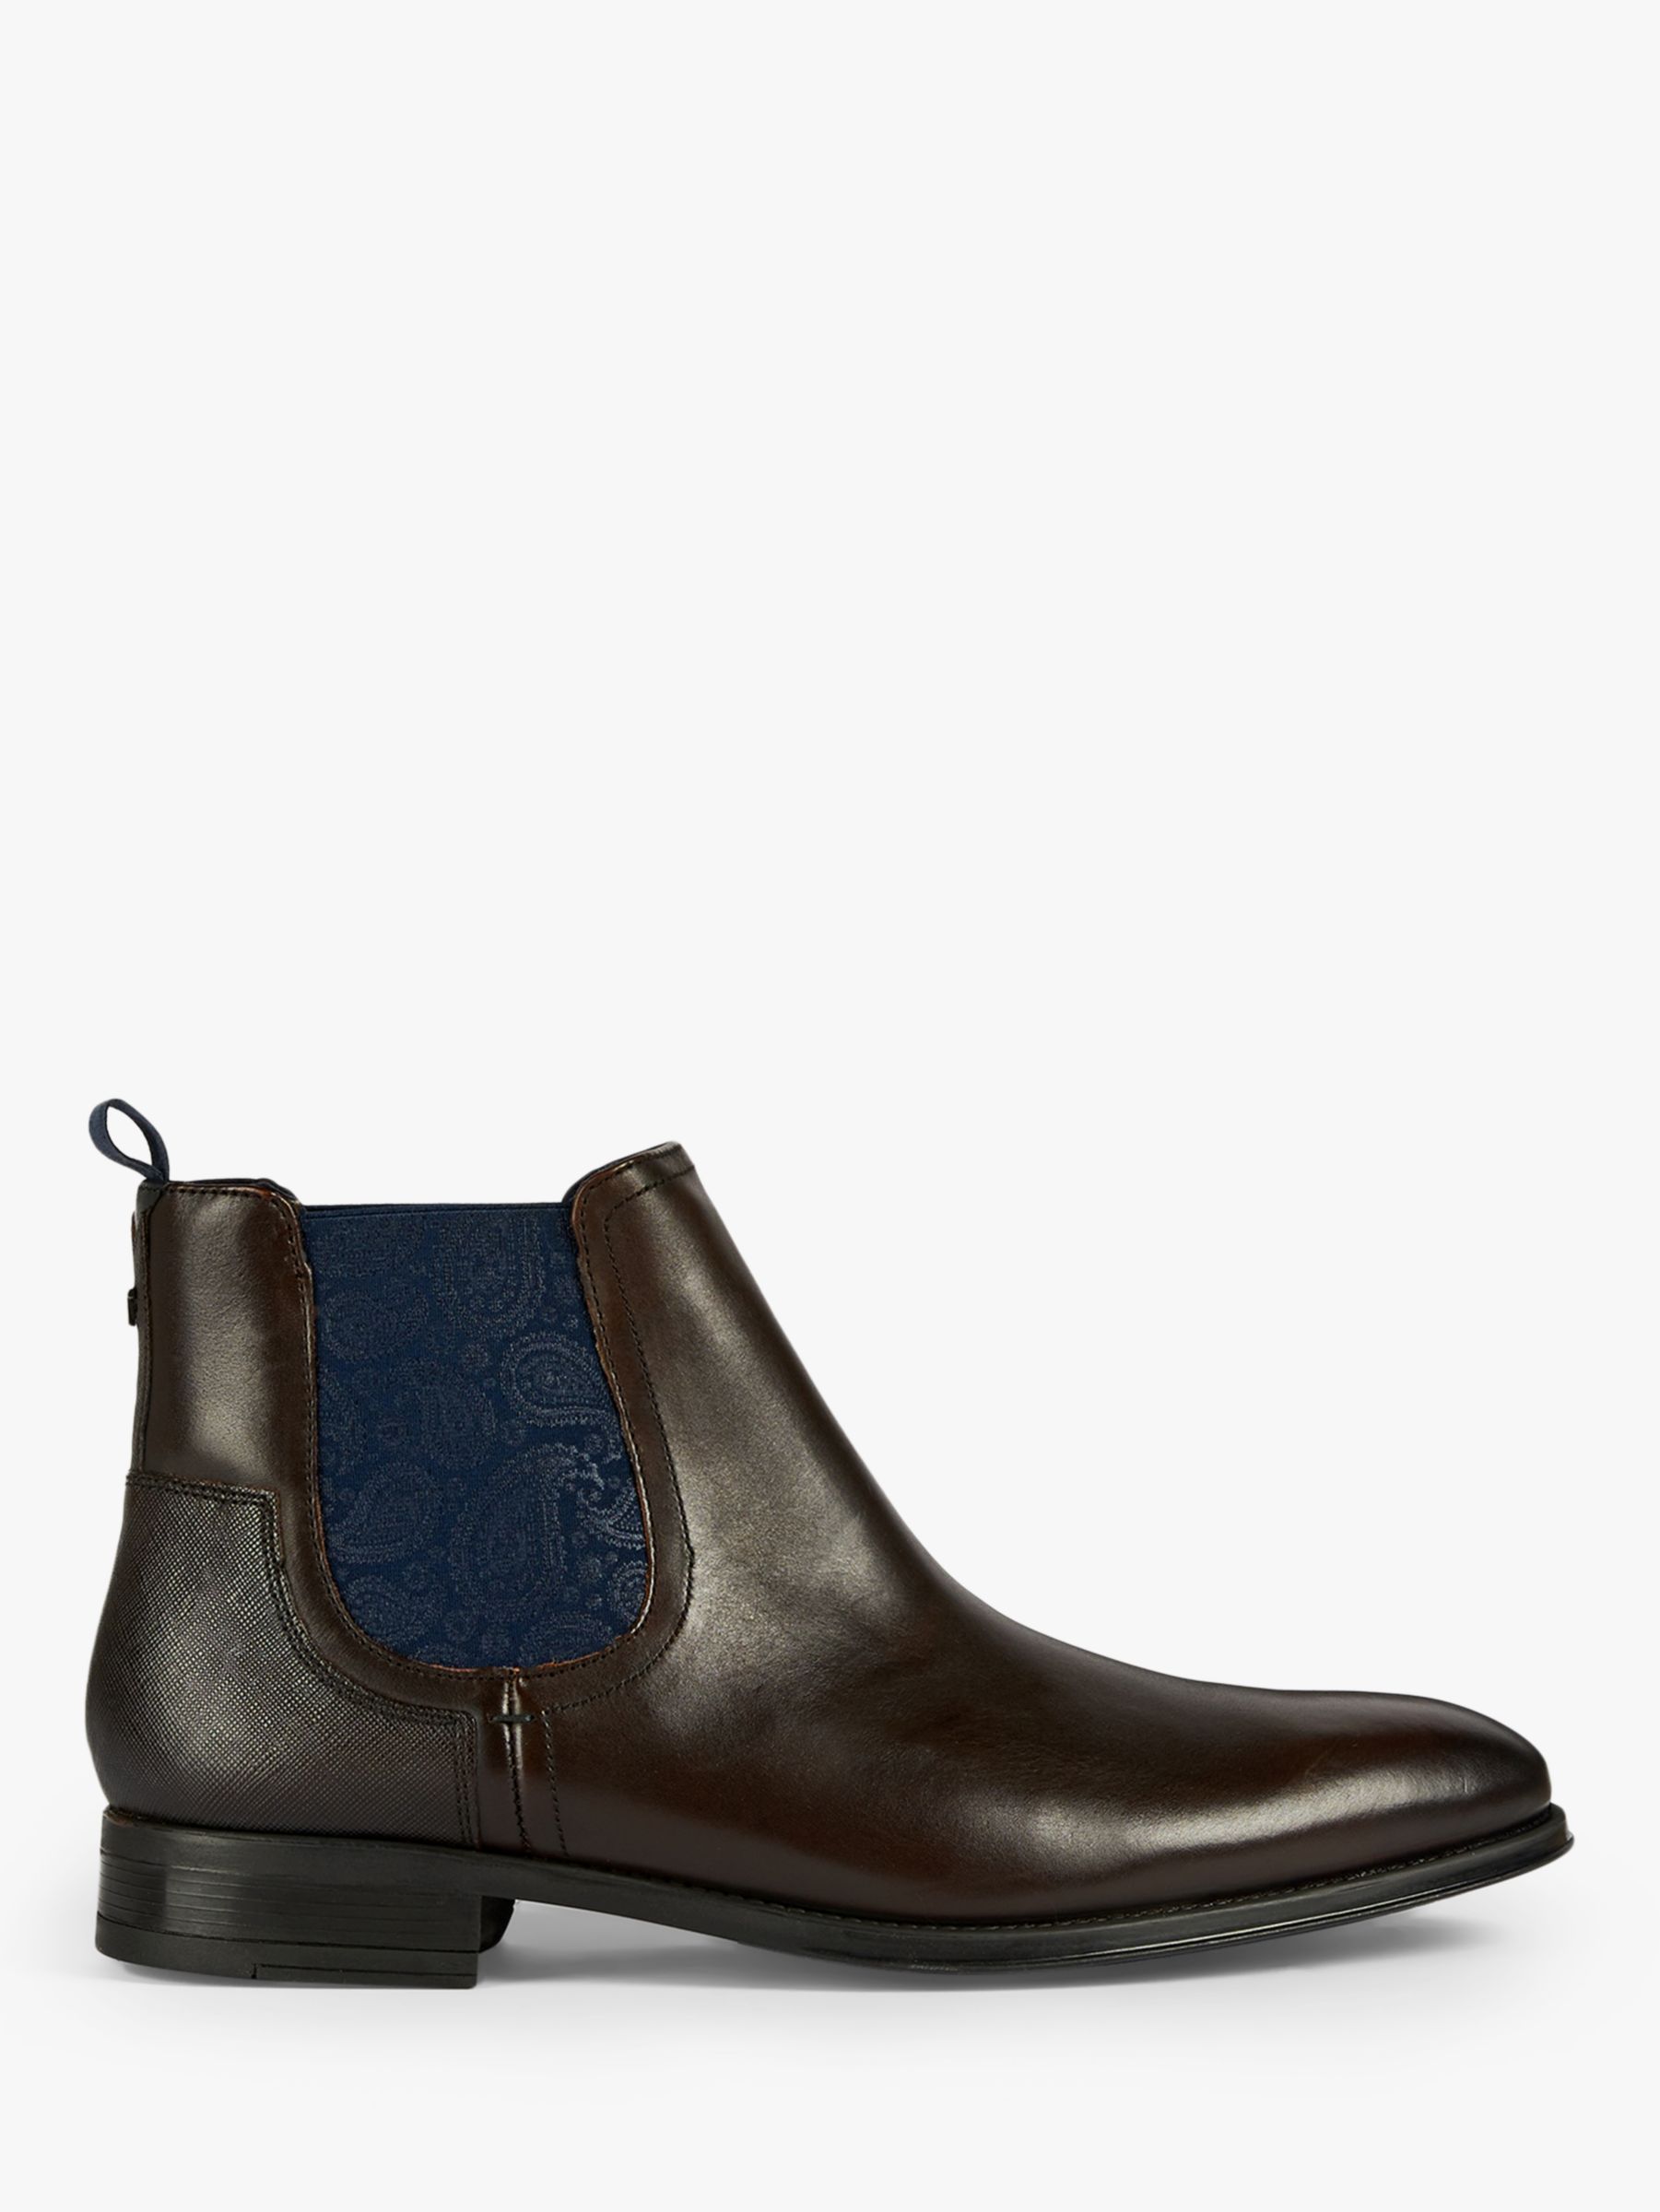 Ted Baker Tradd Leather Chelsea Boots at John Lewis & Partners